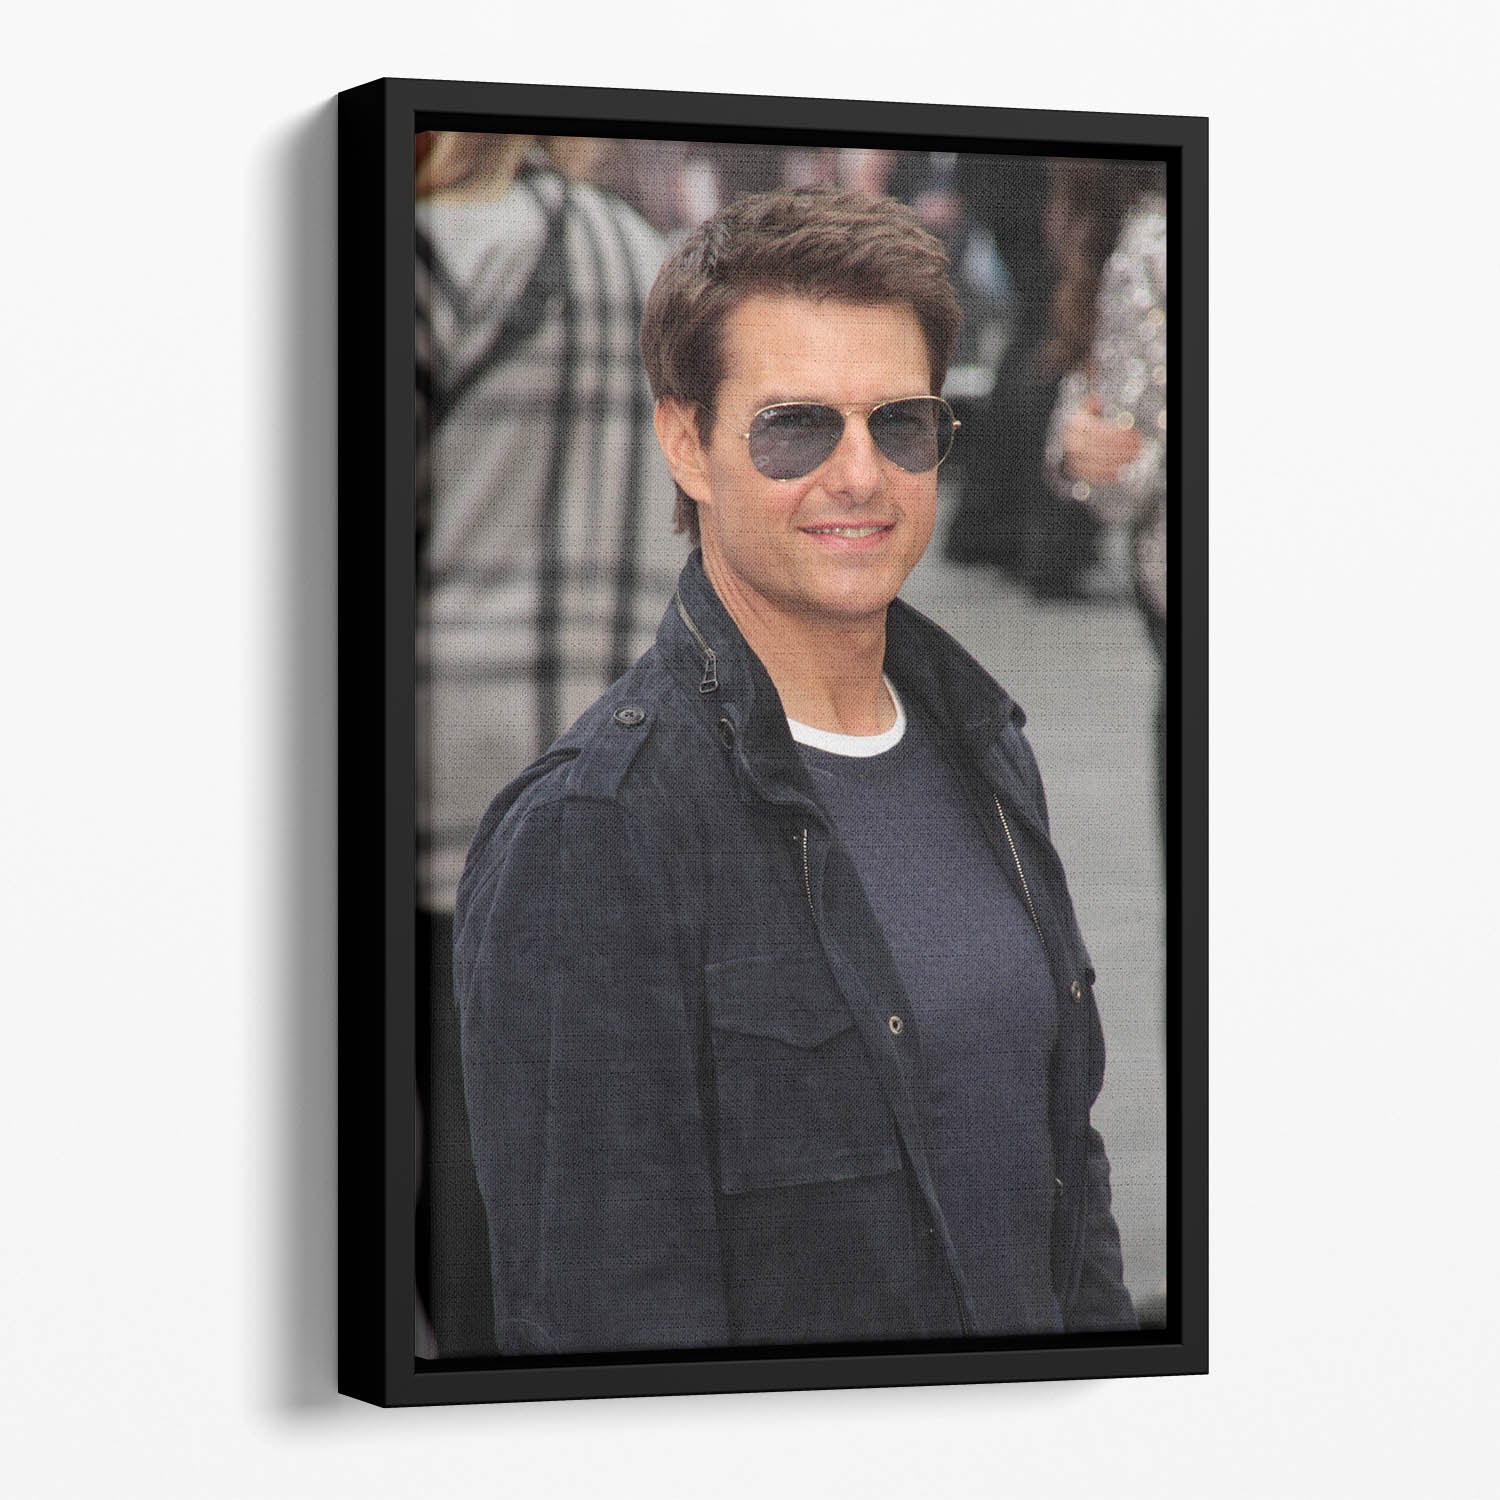 Tom Cruise in sunglasses Floating Framed Canvas